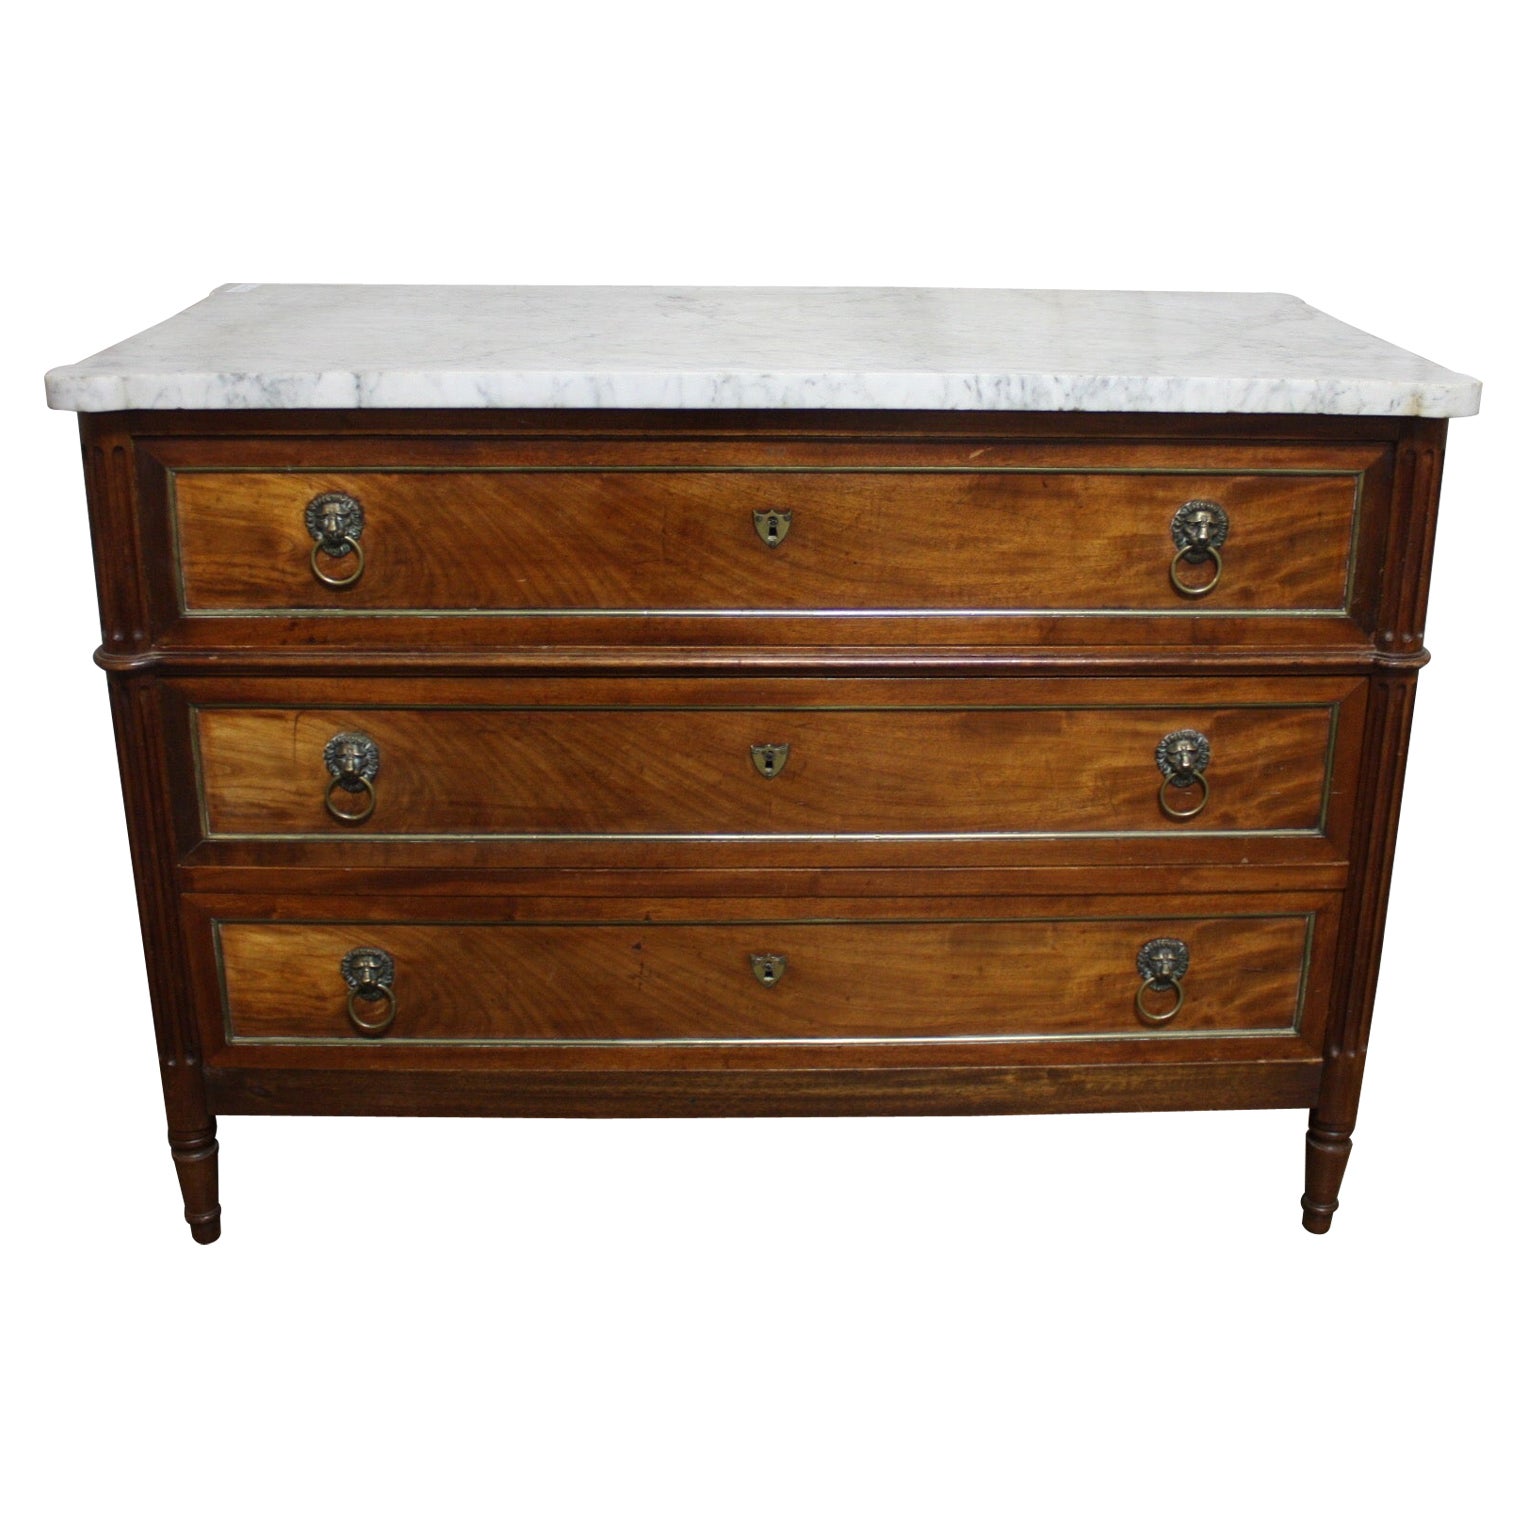 Early 19th Century French Commode